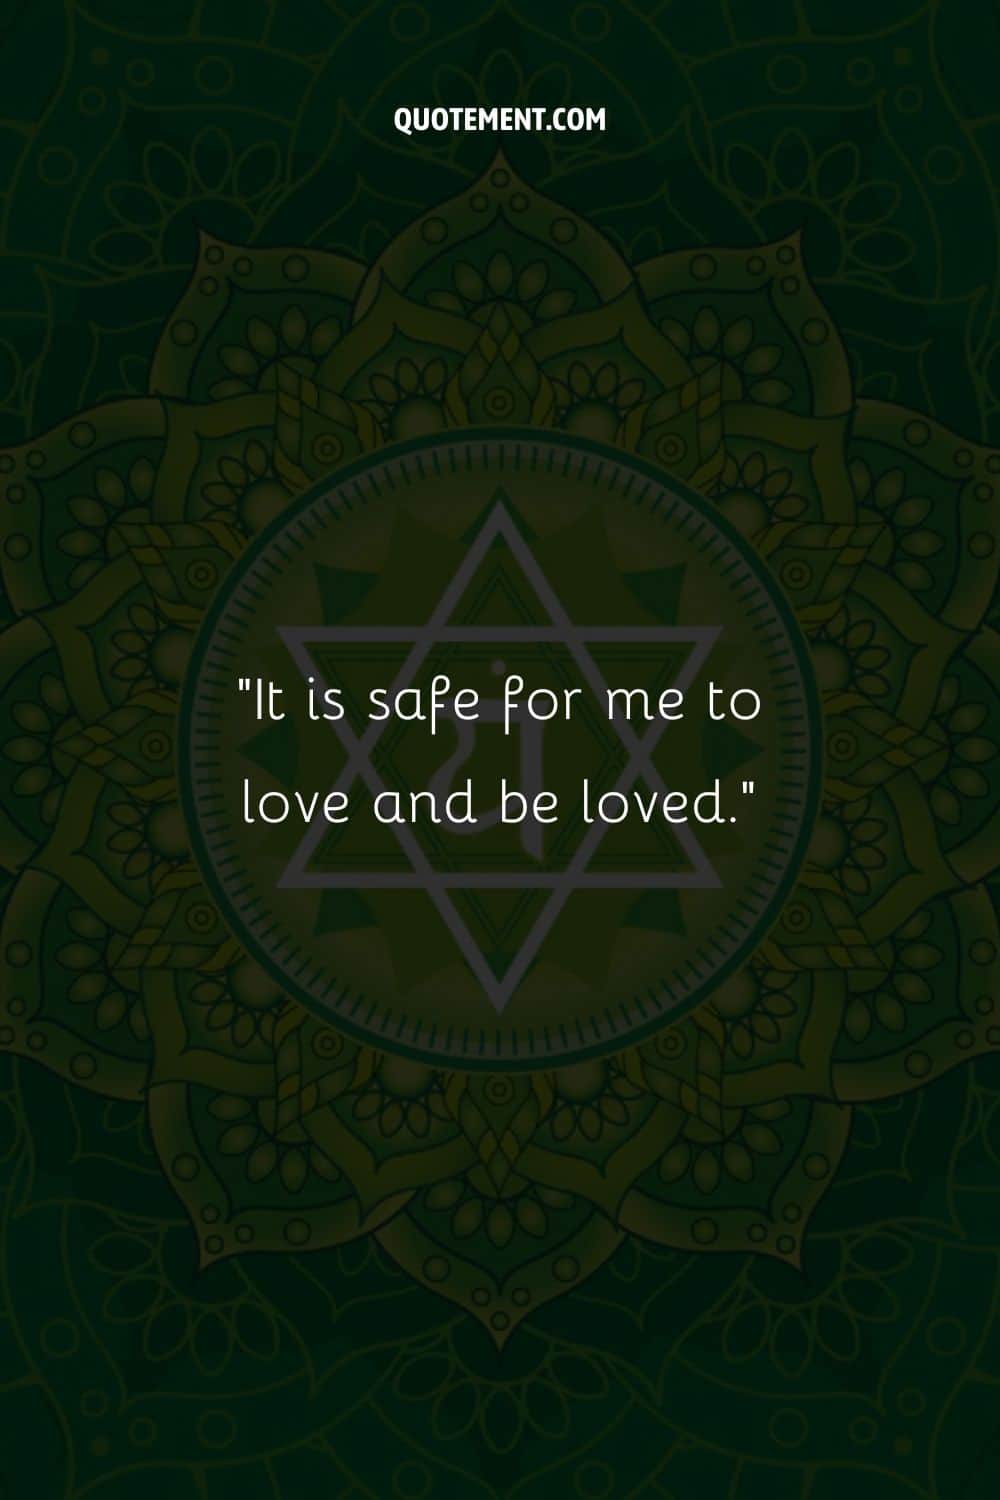 It is safe for me to love and be loved